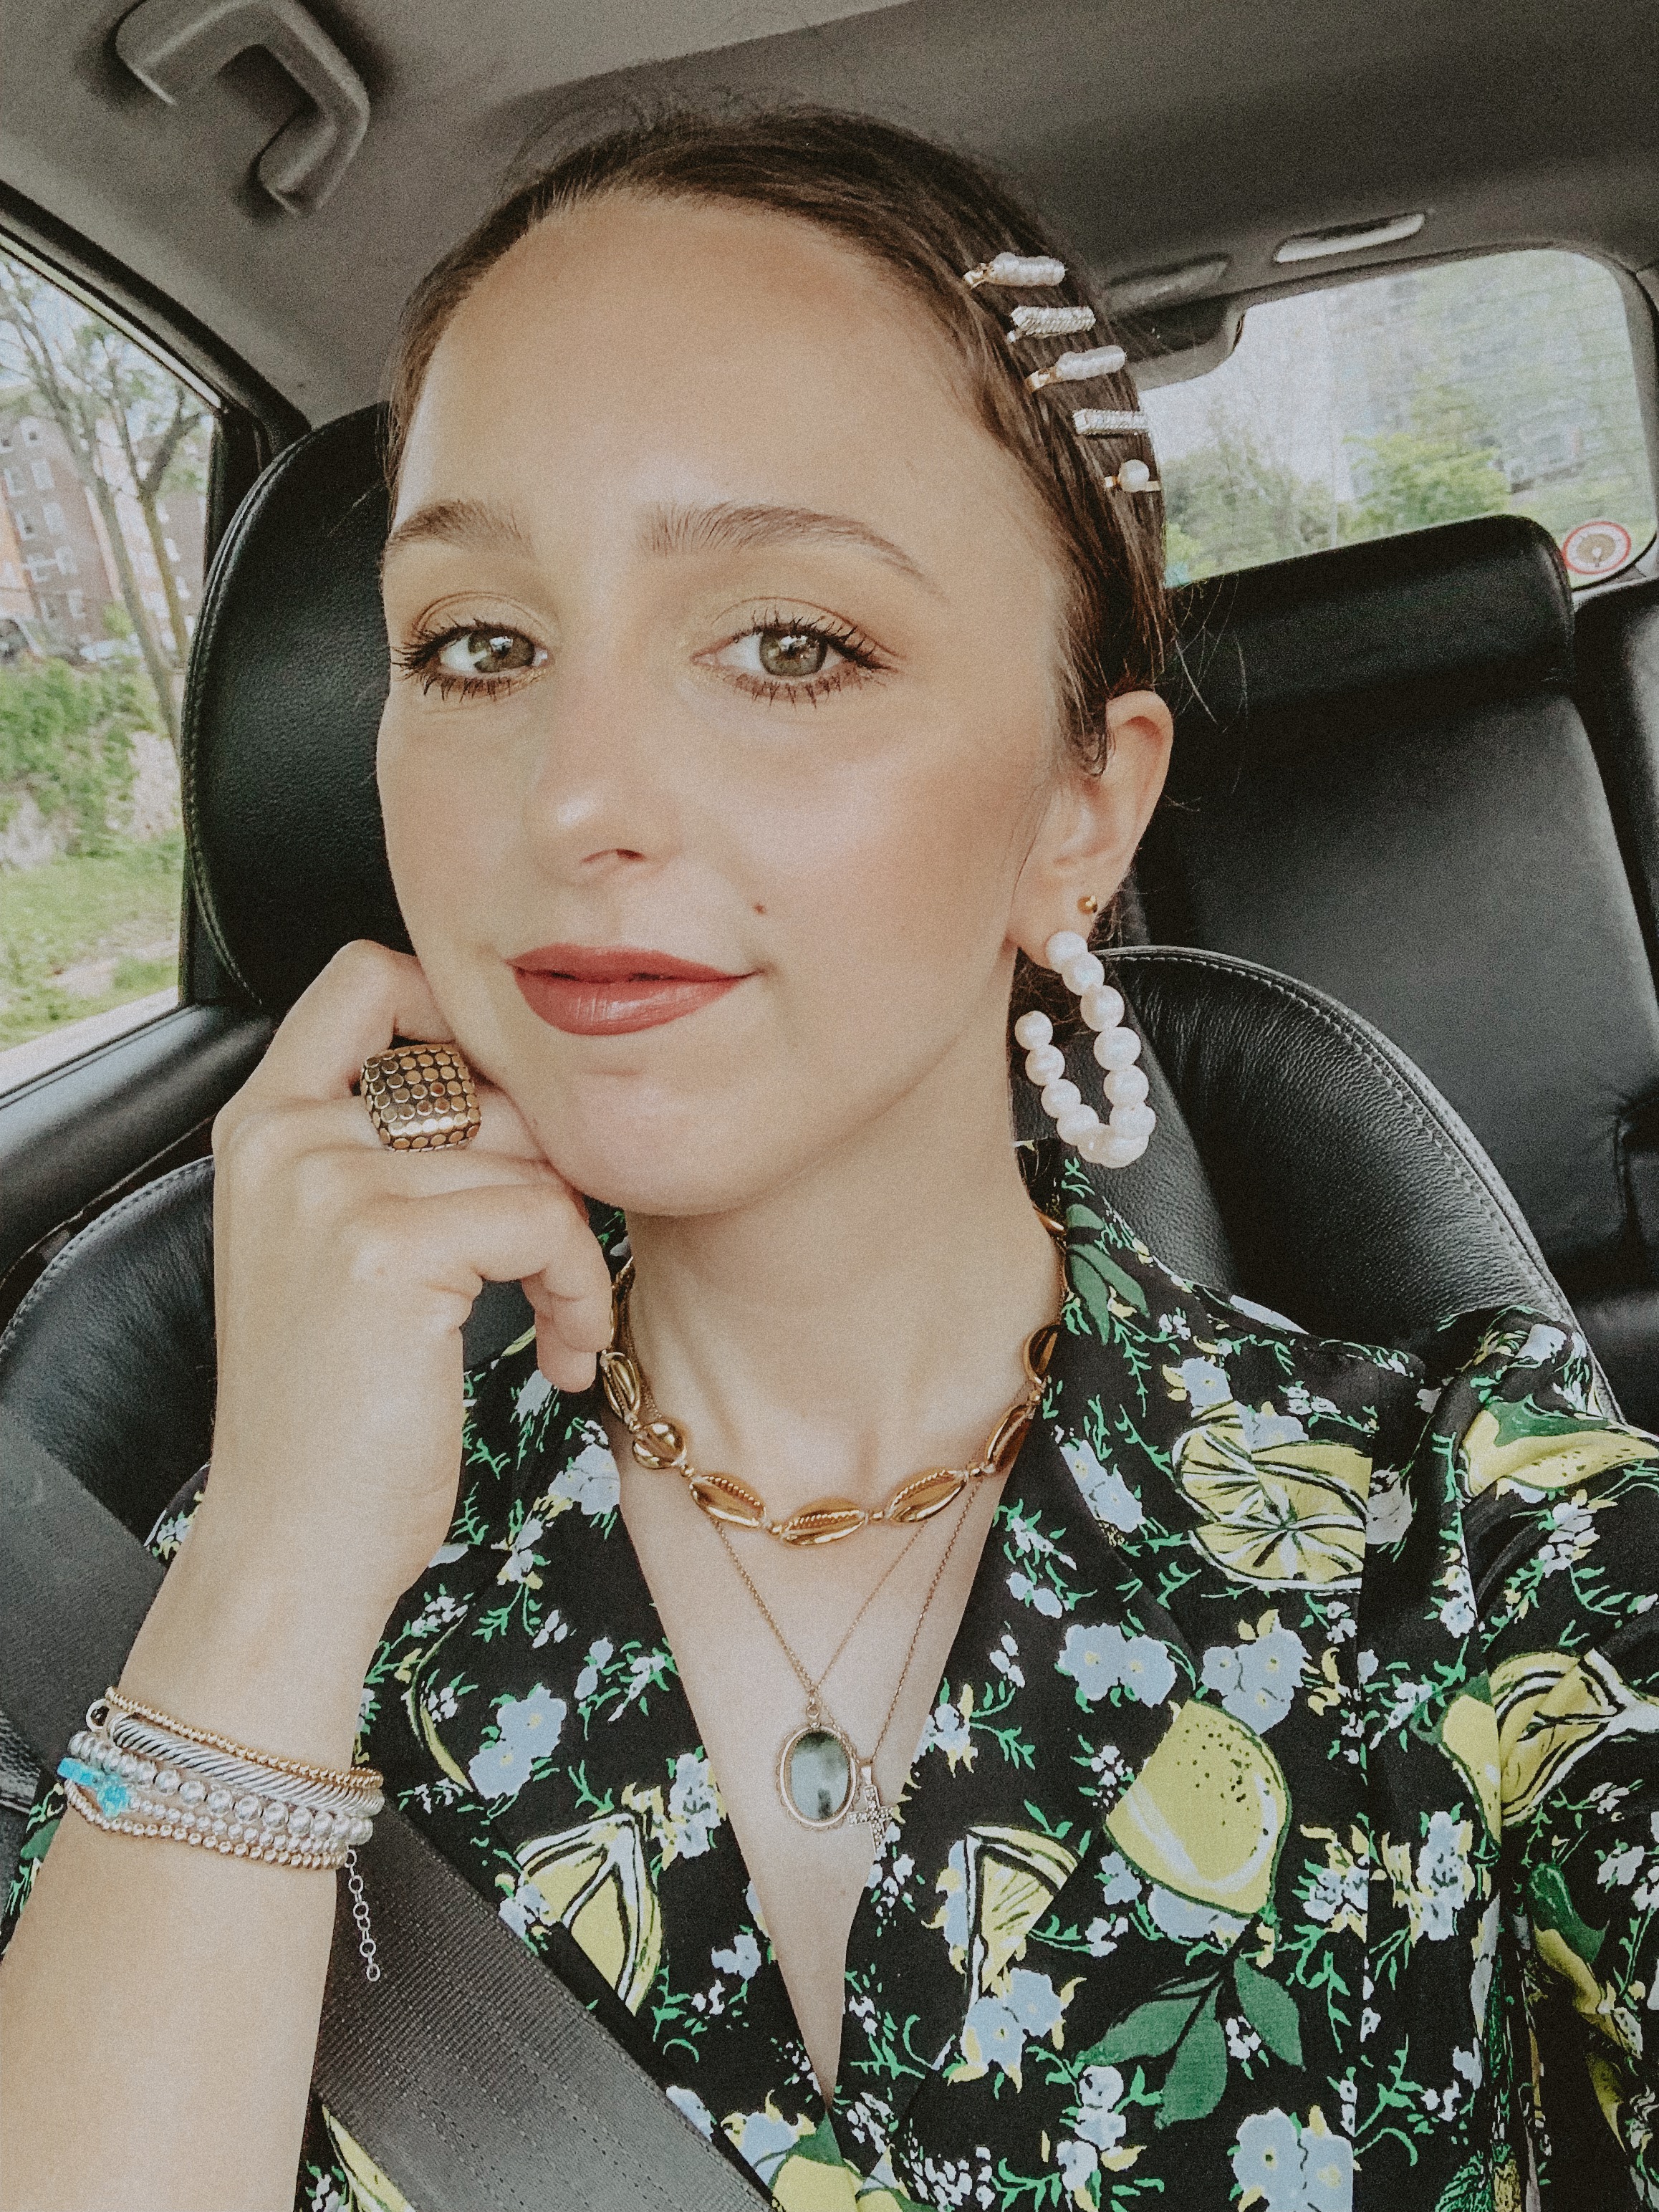 Is It Worth Attending?-The Veuve Clicquot Polo Classic-VCPC-NYC-Liberty State Park-Events-DVF-Style-Outfit-Westchester Blogger #vcstyle #VeuveClicquot #vcpc #nyc #events #style #Oufit #summerstyle